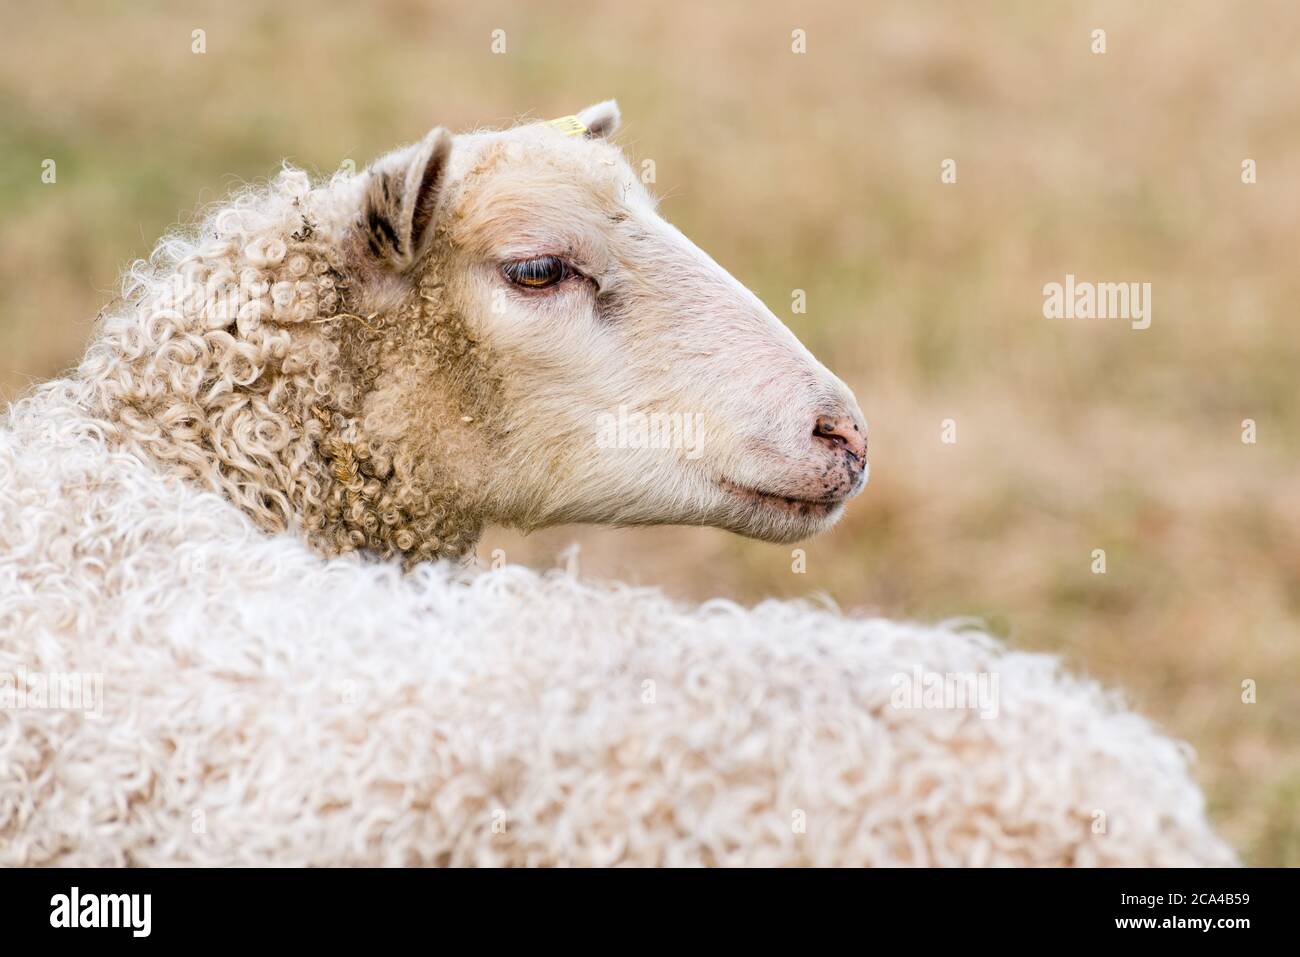 Domestic sheep (Ovis aries) are quadrupedal, ruminant mammals typically kept as livestock. Stock Photo